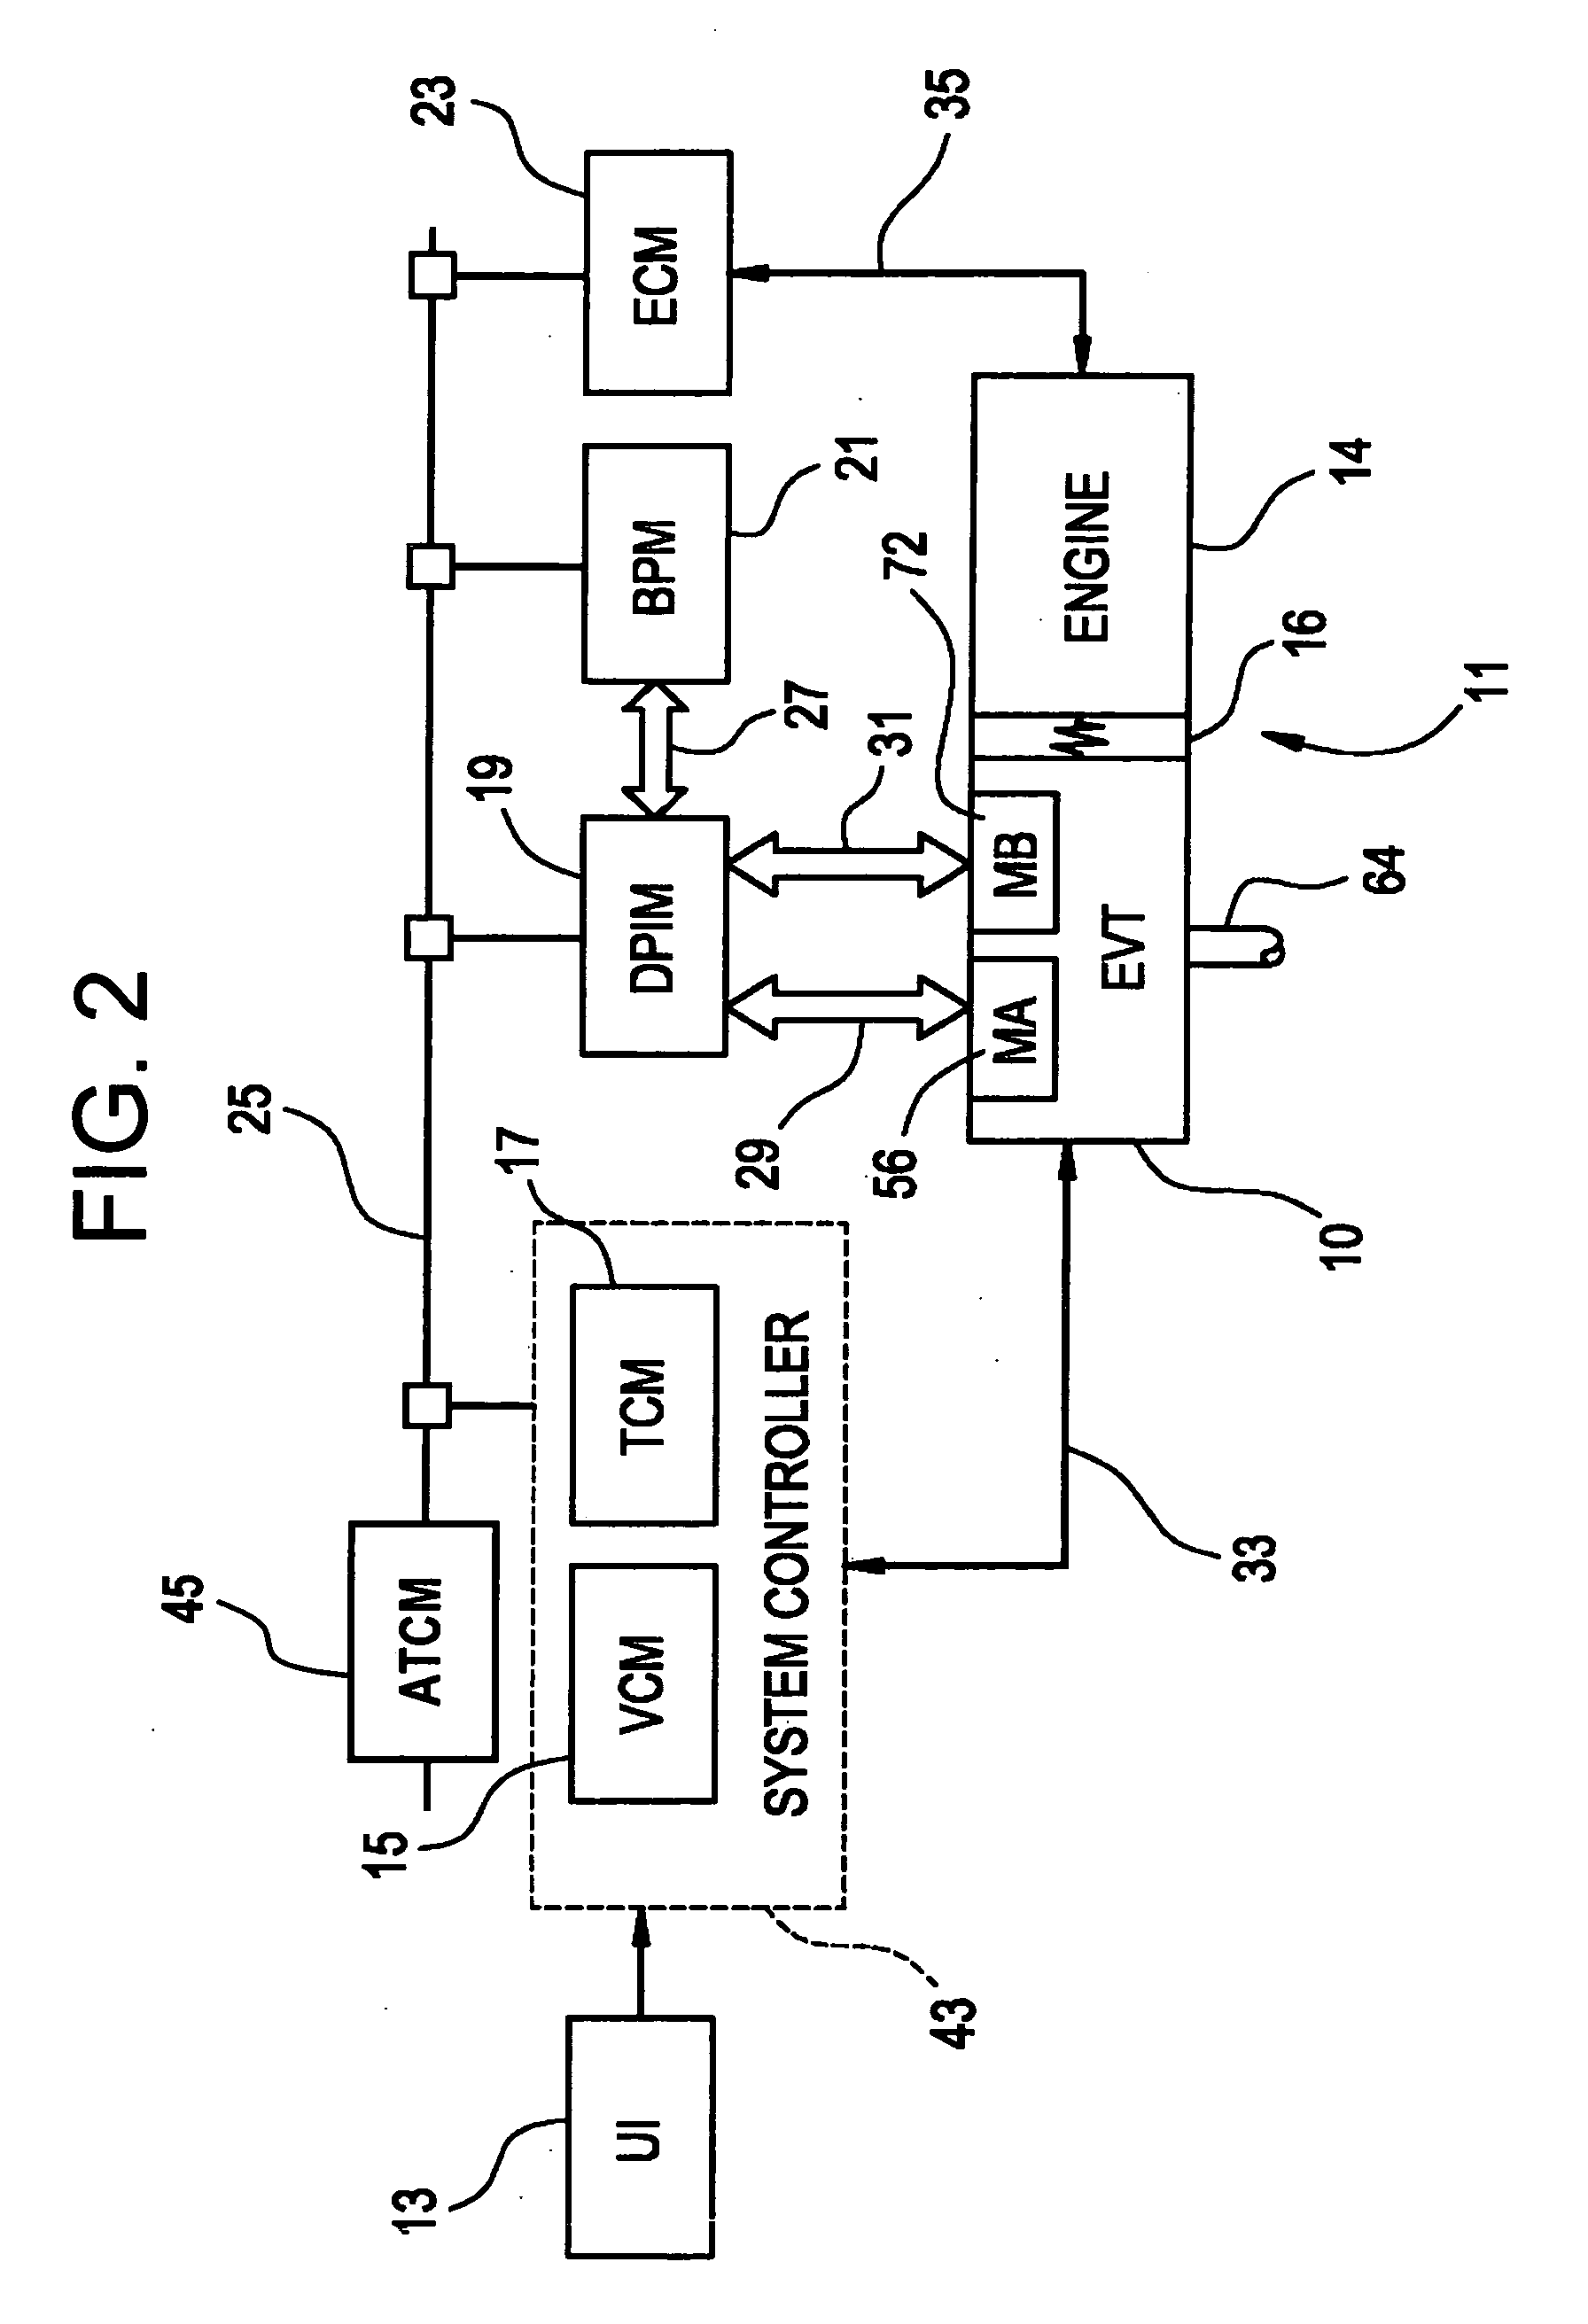 Method for automatic traction control in a hybrid electric vehicle